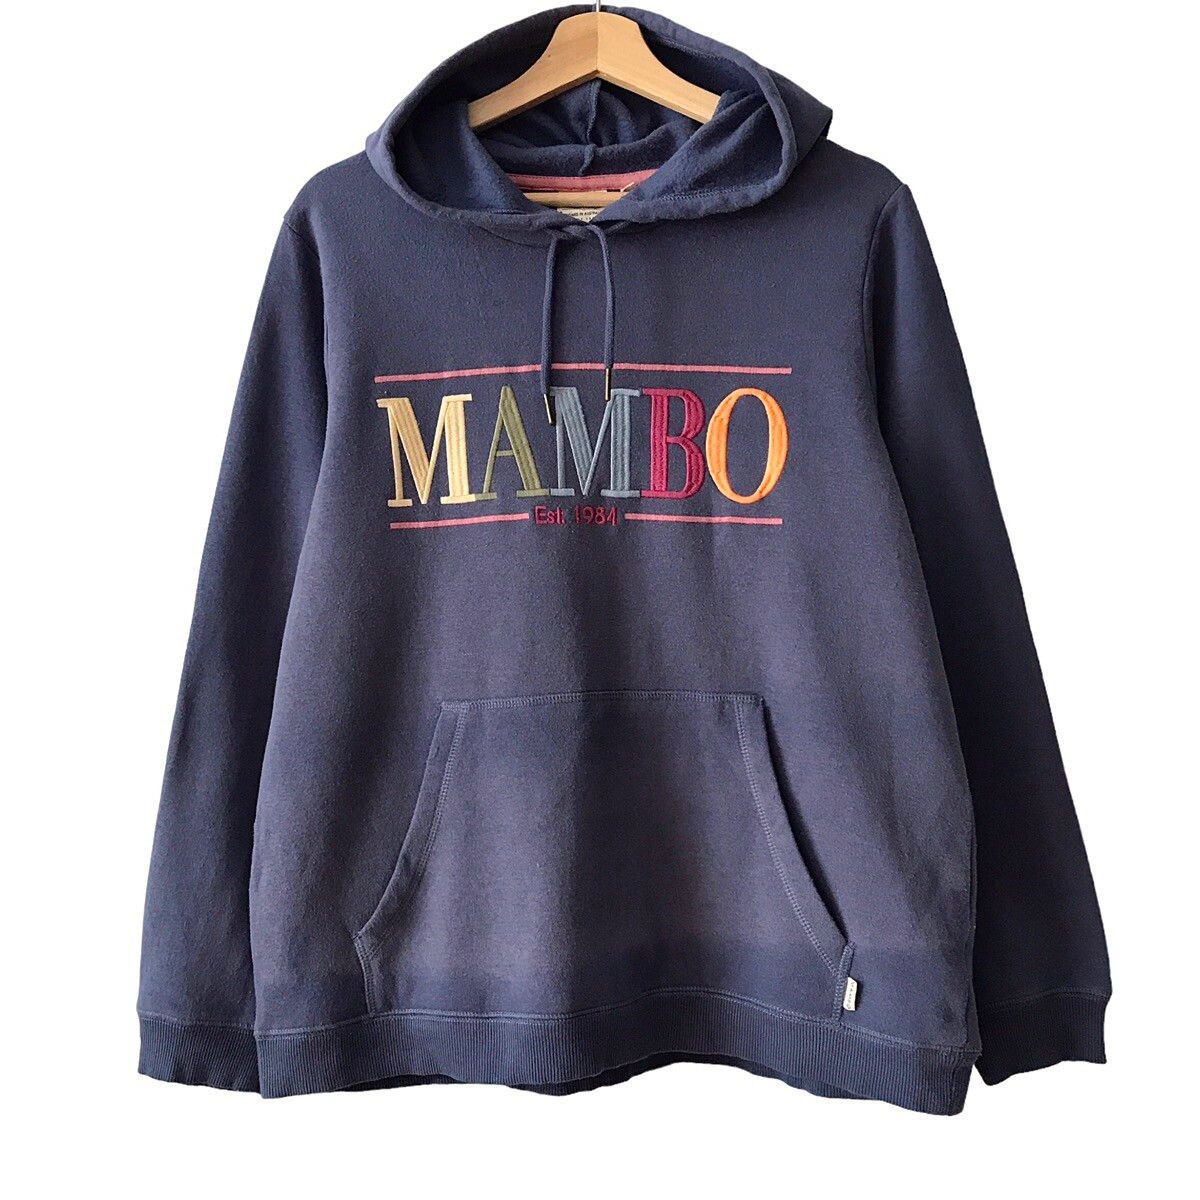 Vintage Mambo Australia Embroidery Logo Pullover Hoodie Size US L / EU 52-54 / 3 - 1 Preview